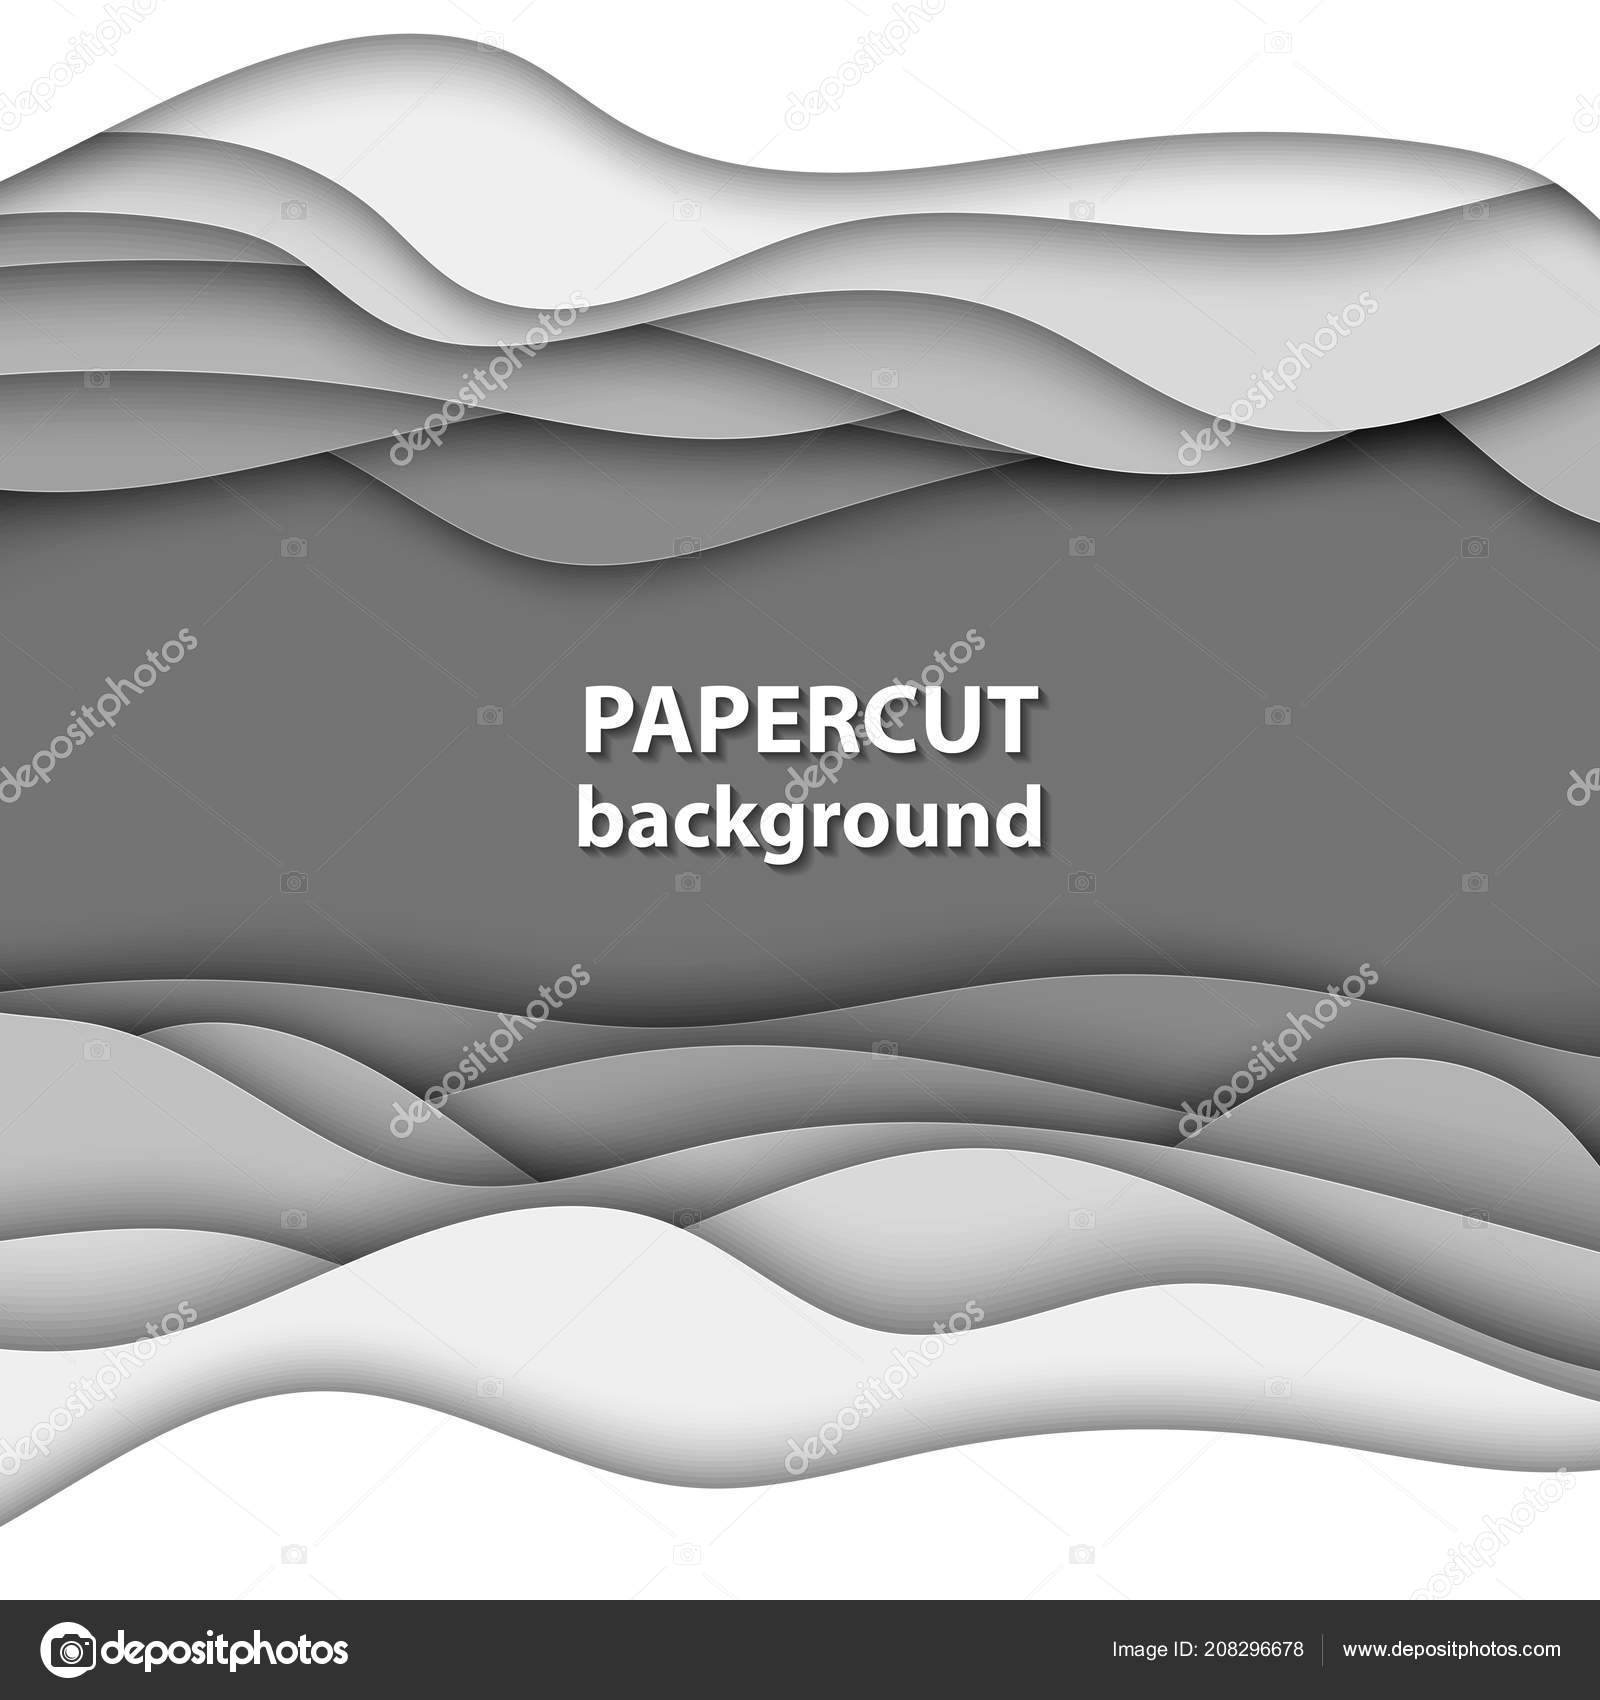 Abstract paper cut shapes Vector Art Stock Images | Depositphotos